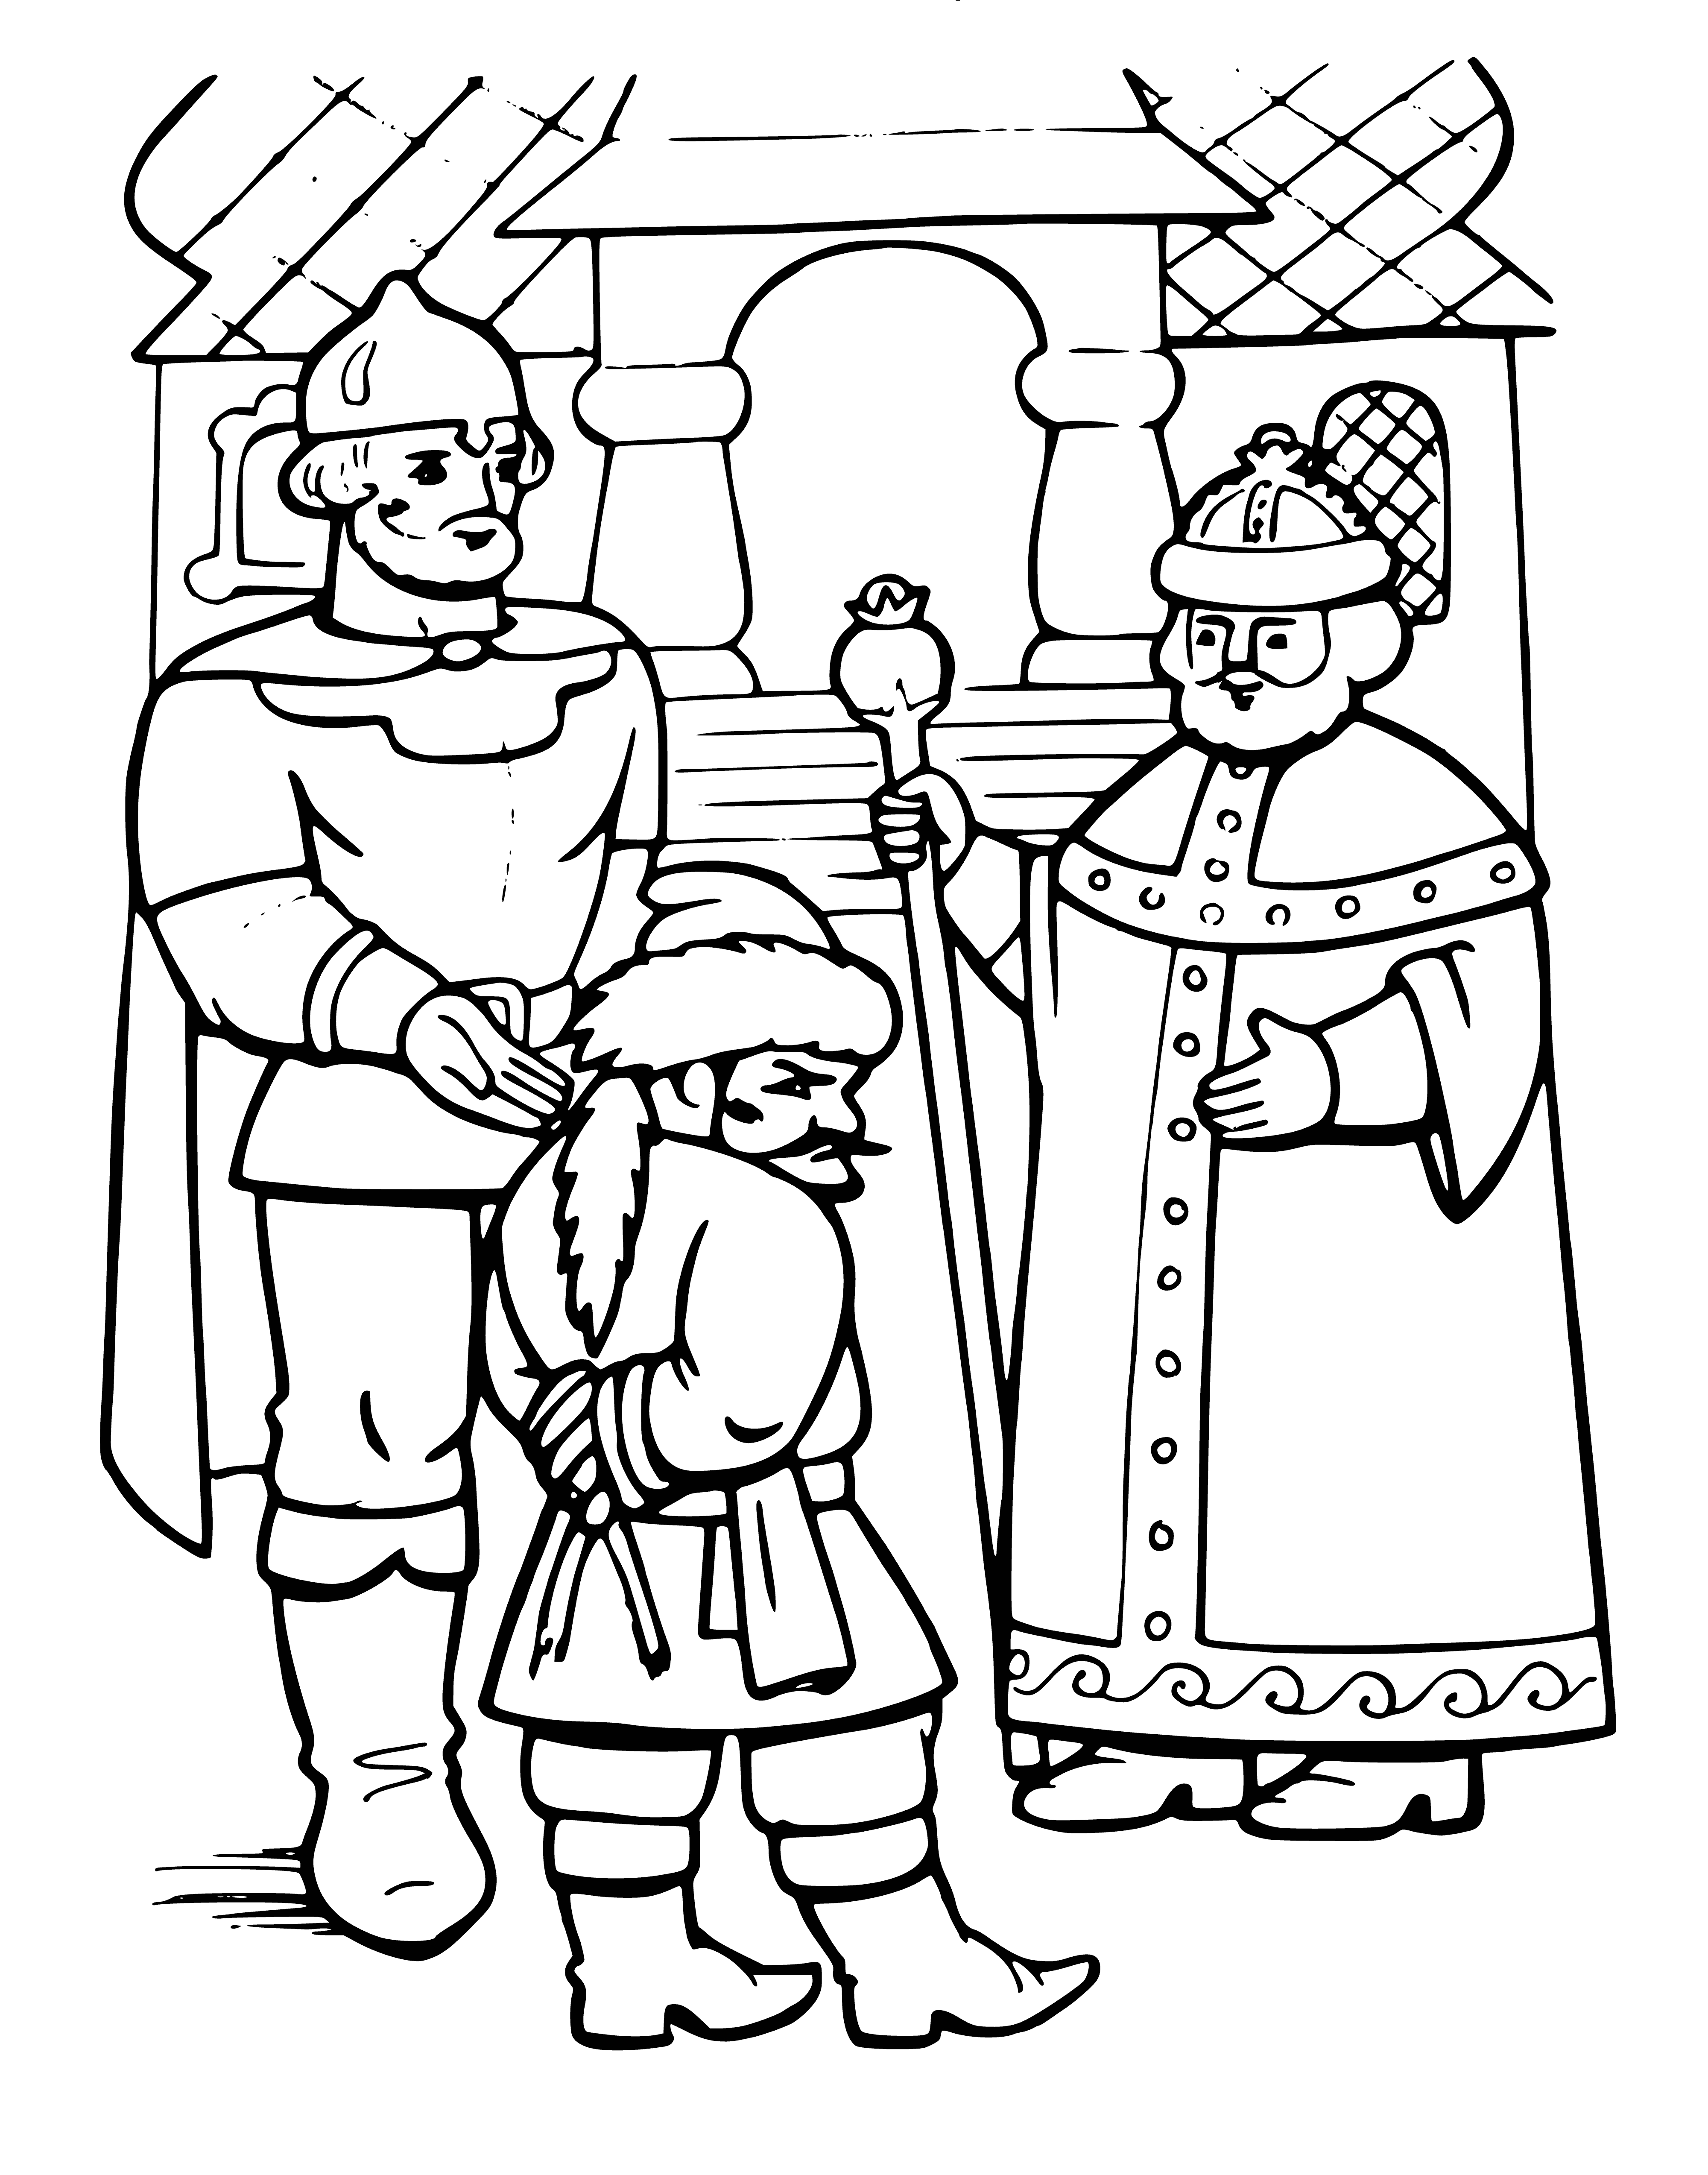 coloring page: Man brings nightingale to King, who is delighted. Man is pleased with himself for successful task.